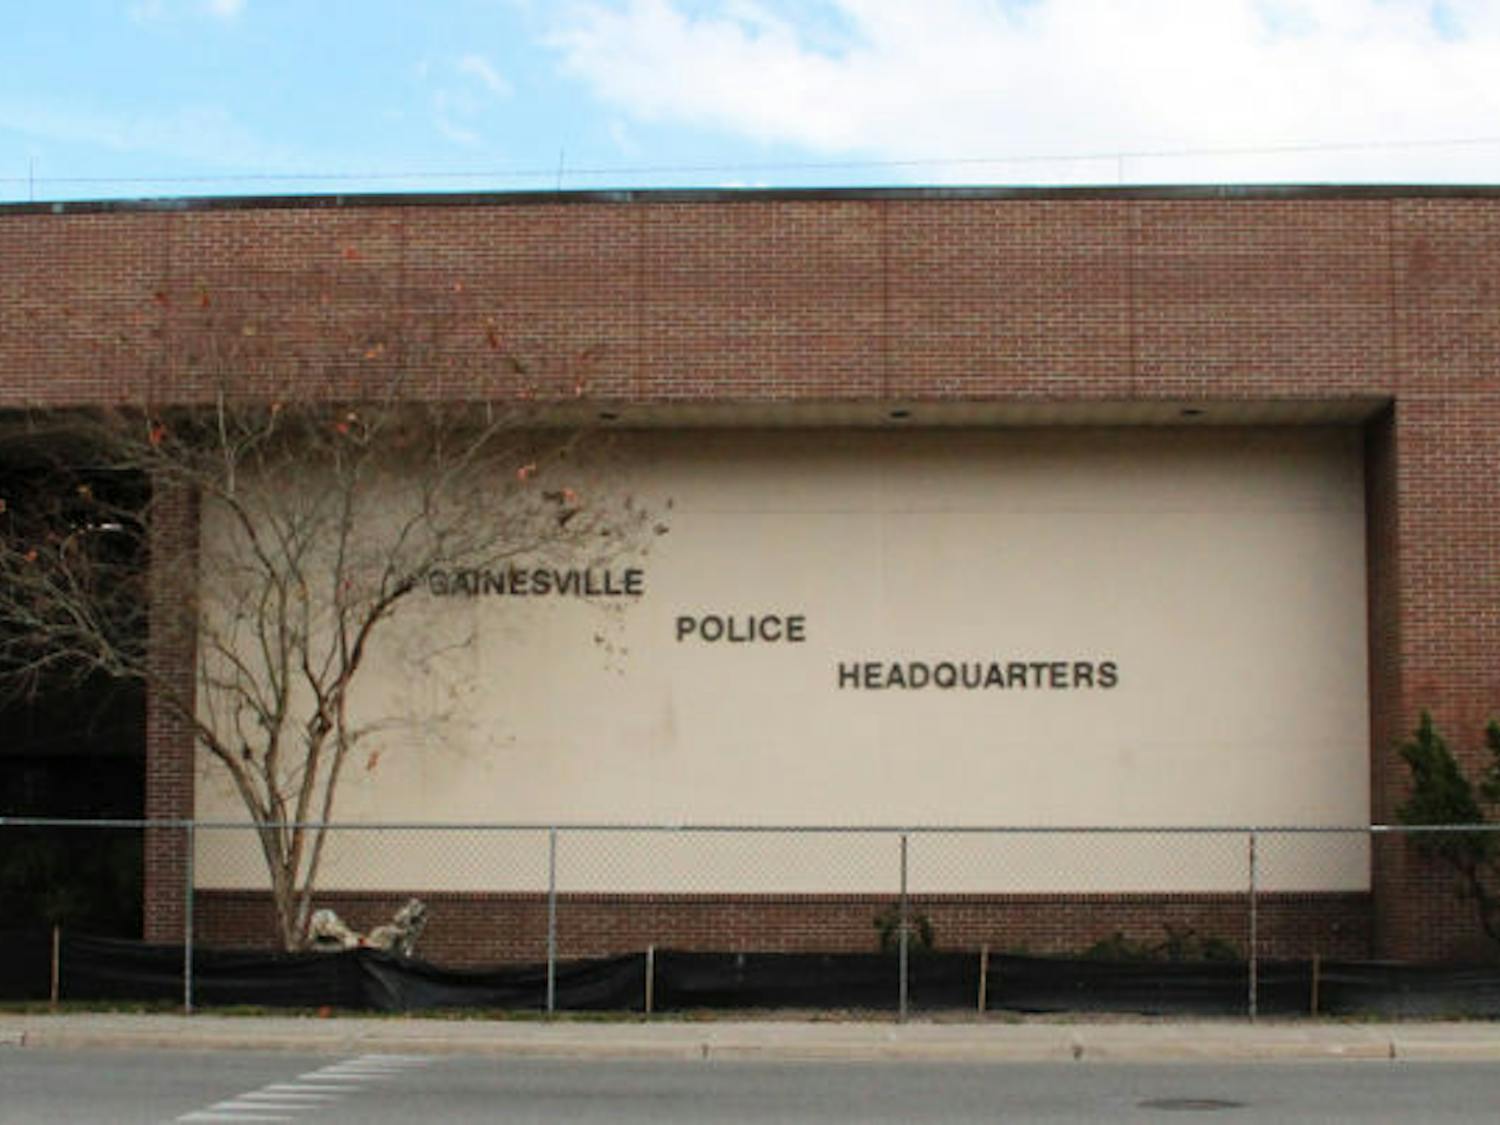 Gainesville Police Department Headquarters, 721 NW Sixth St., is scheduled to be demolished at 8:30 a.m. The demolition is the first step in the reconstruction process, which will take about one year to complete, said GPD spokesman Officer Ben Tobias.